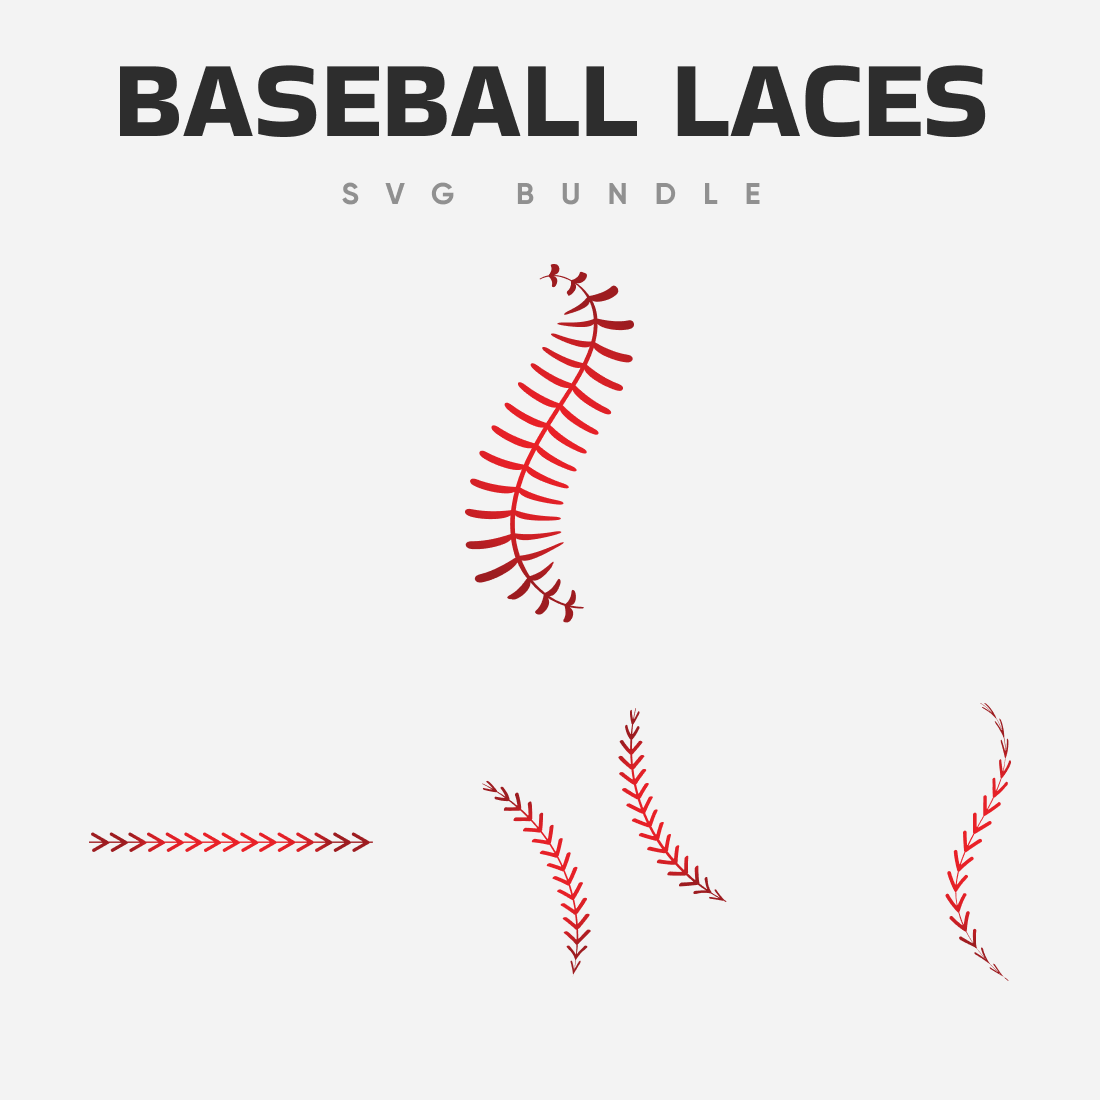 Different shapes of baseball laces.